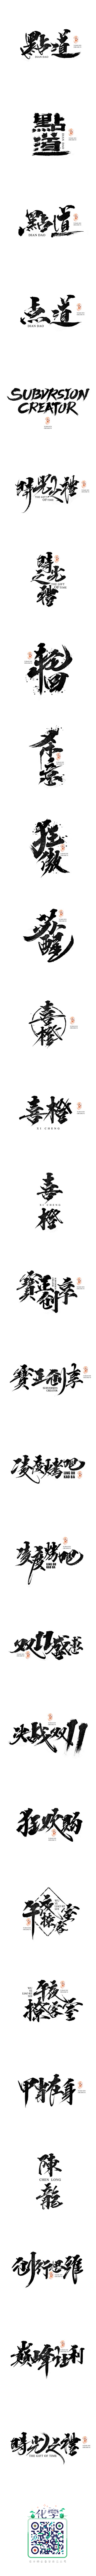 Taylor_Chan采集到字体